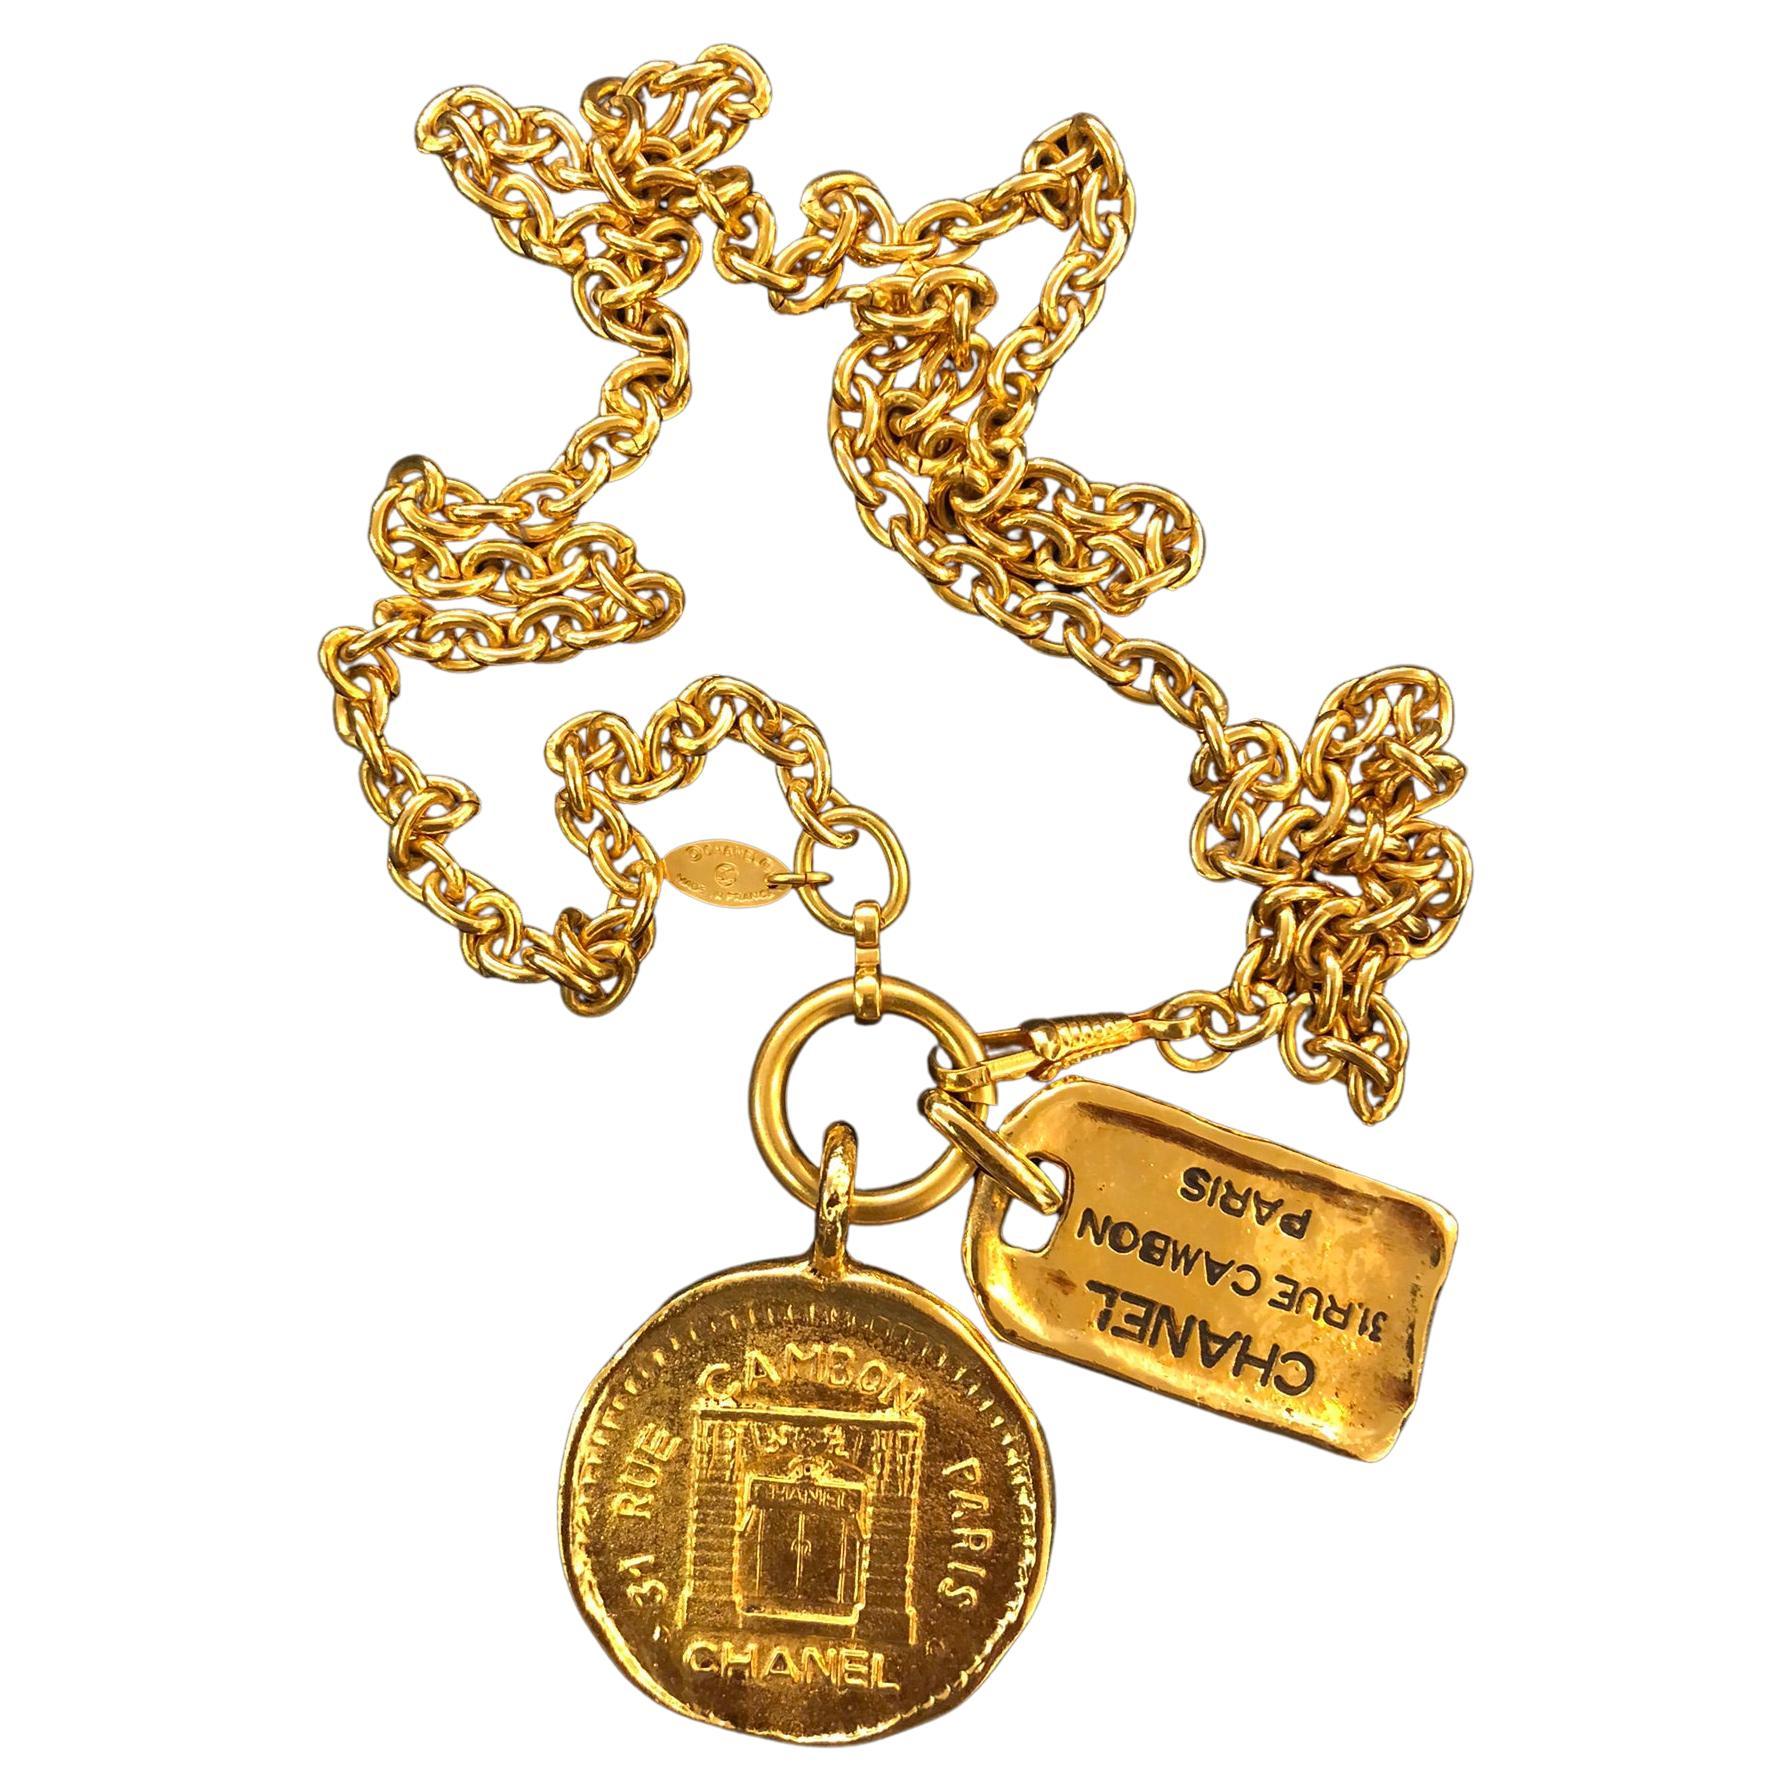 1980s Vintage Chanel Gold Toned 31 Rue Cambon Charm Necklace 